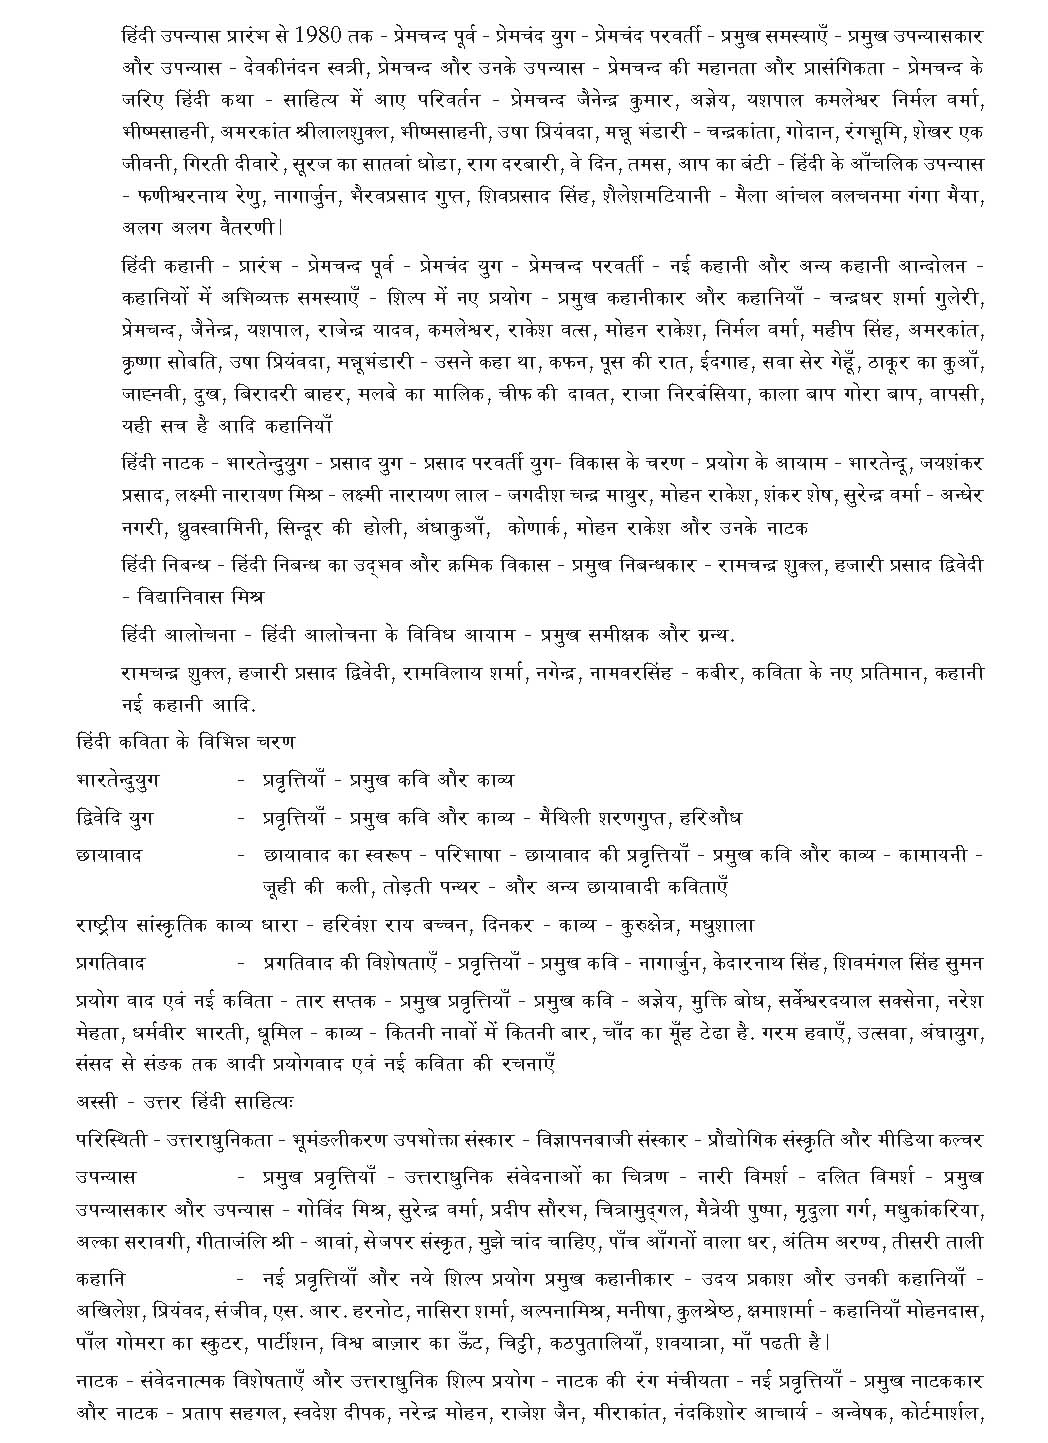 KTET Exam Syllabus for Category III Paper III Examination of The Year 2012 9